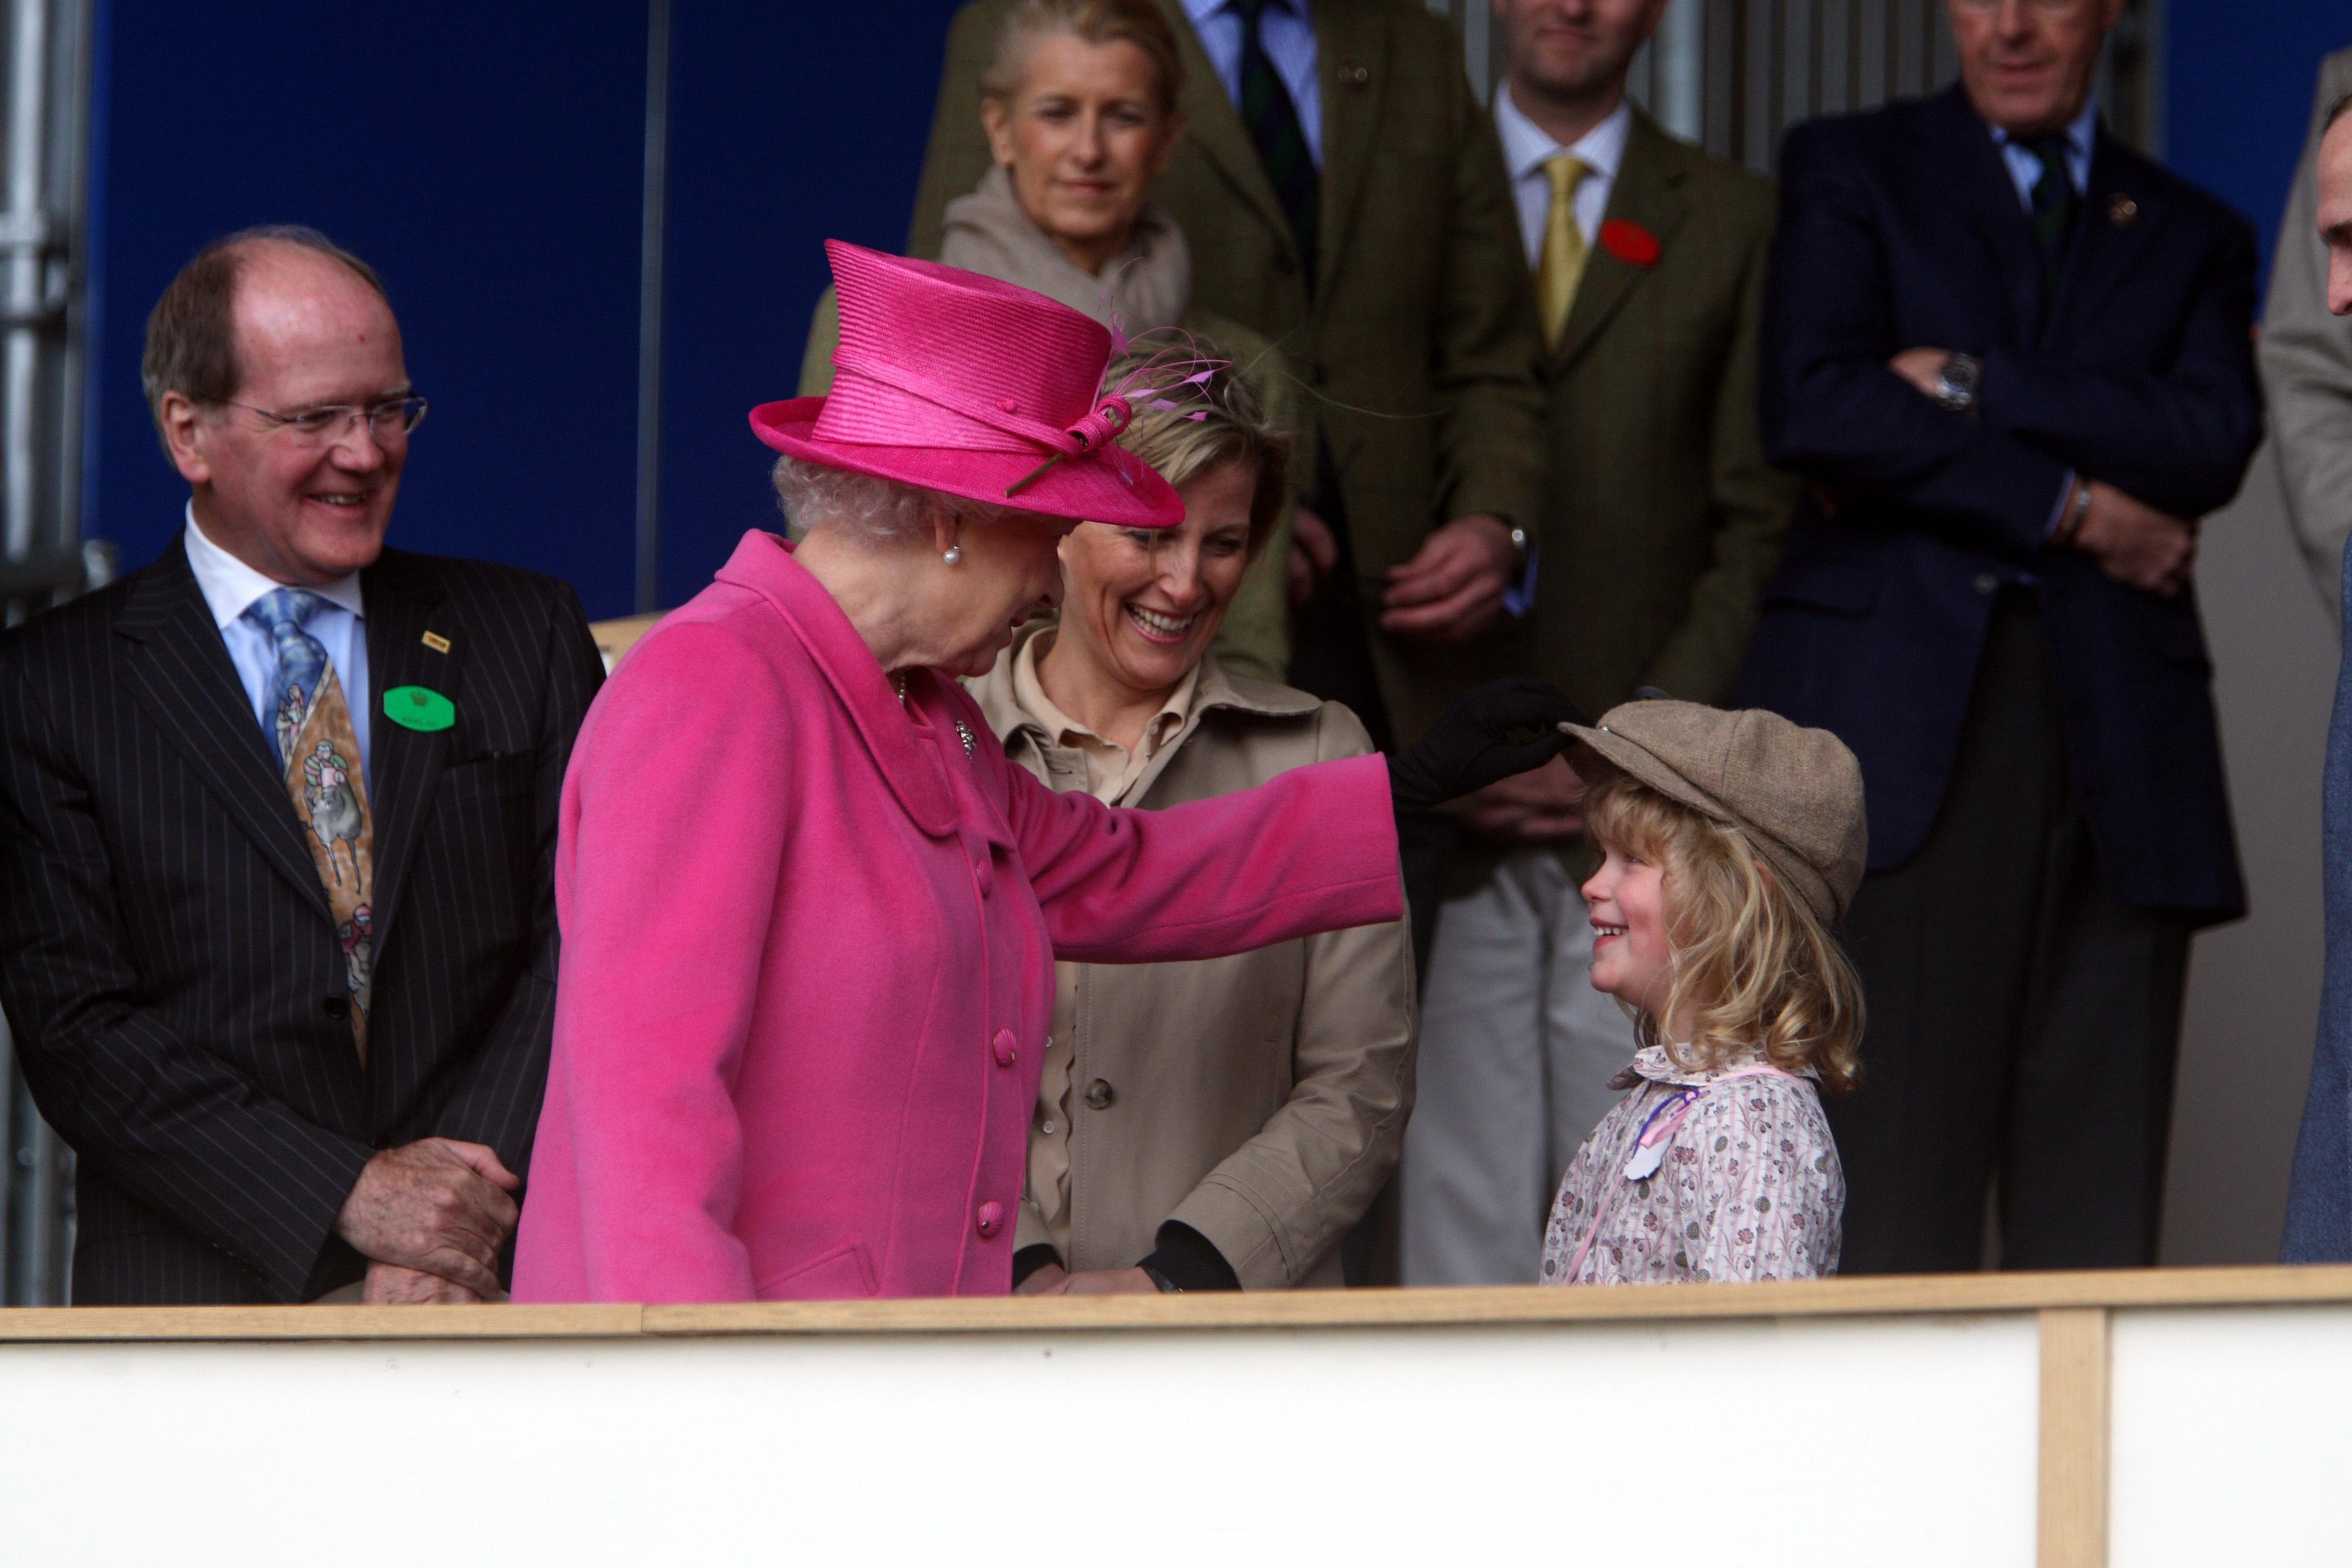 Queen Elizabeth II pictured with her daughter-in-law, Sophie, Countess of Wessex and granddaughter Lady Louise Windsor at the Royal Windsor Horse show, Windsor ┃Source: Getty Images